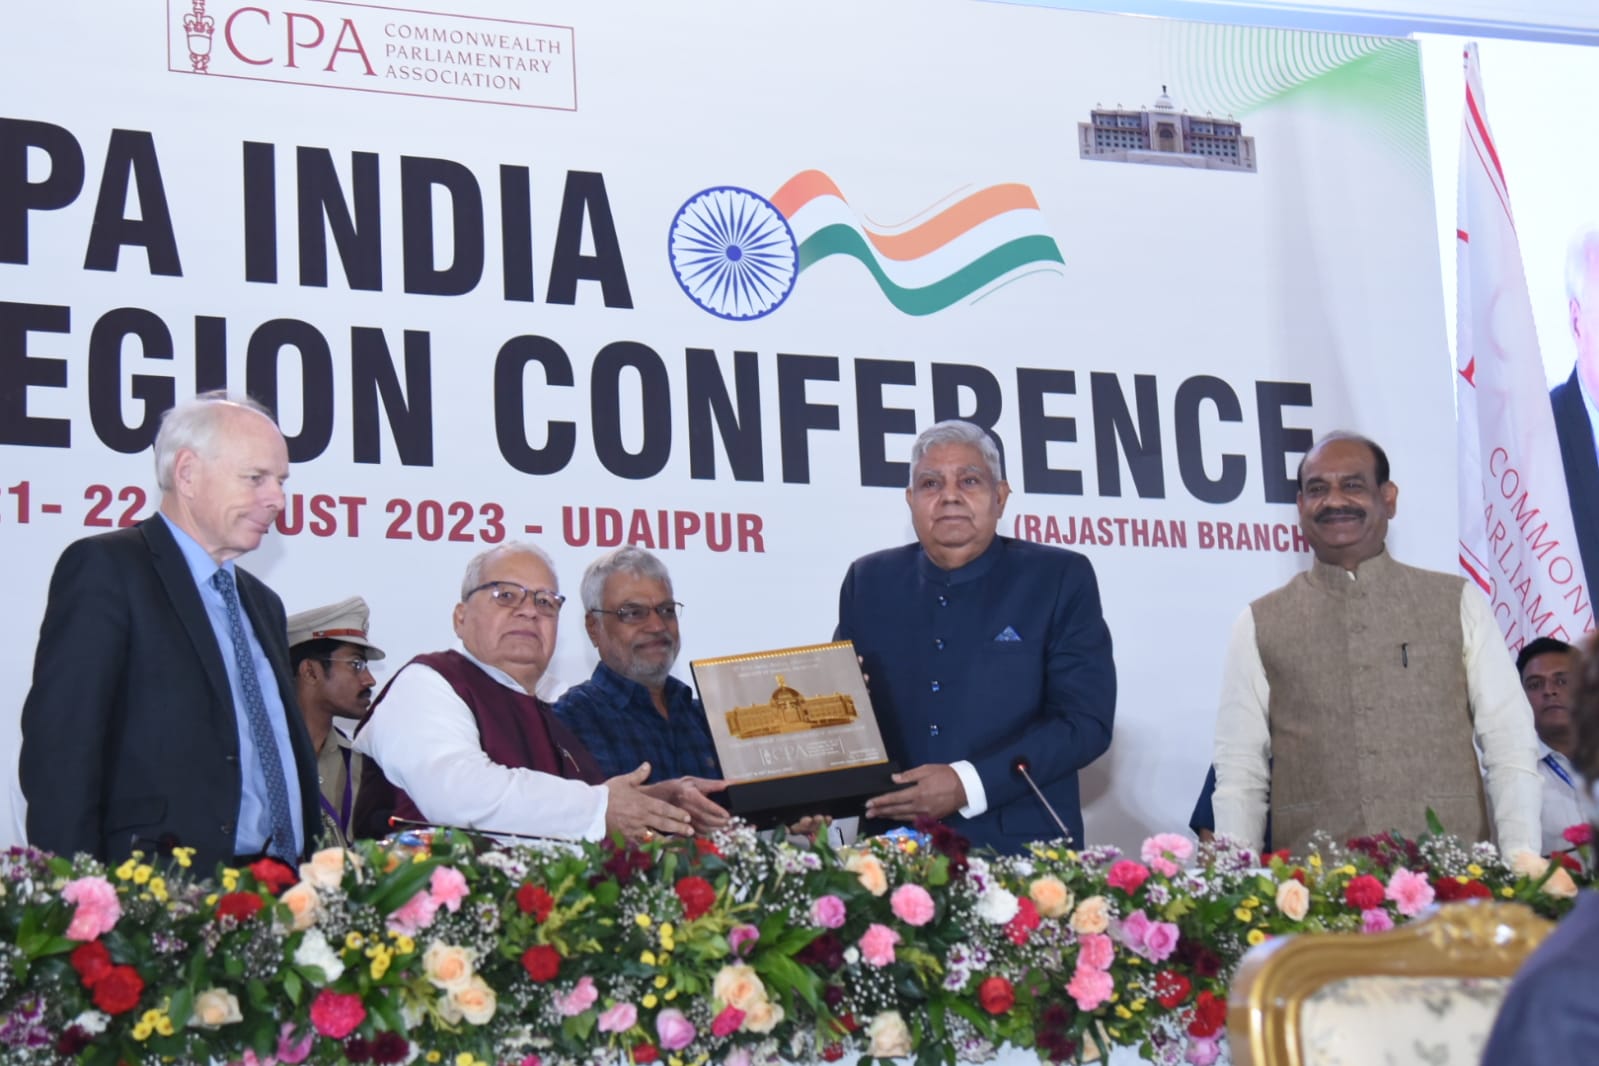 The Vice-President, Shri Jagdeep Dhankhar attending the valedictory session of 9th Commonwealth Parliamentary Association - India Region Conference in Udaipur, Rajasthan on August 22, 2023.